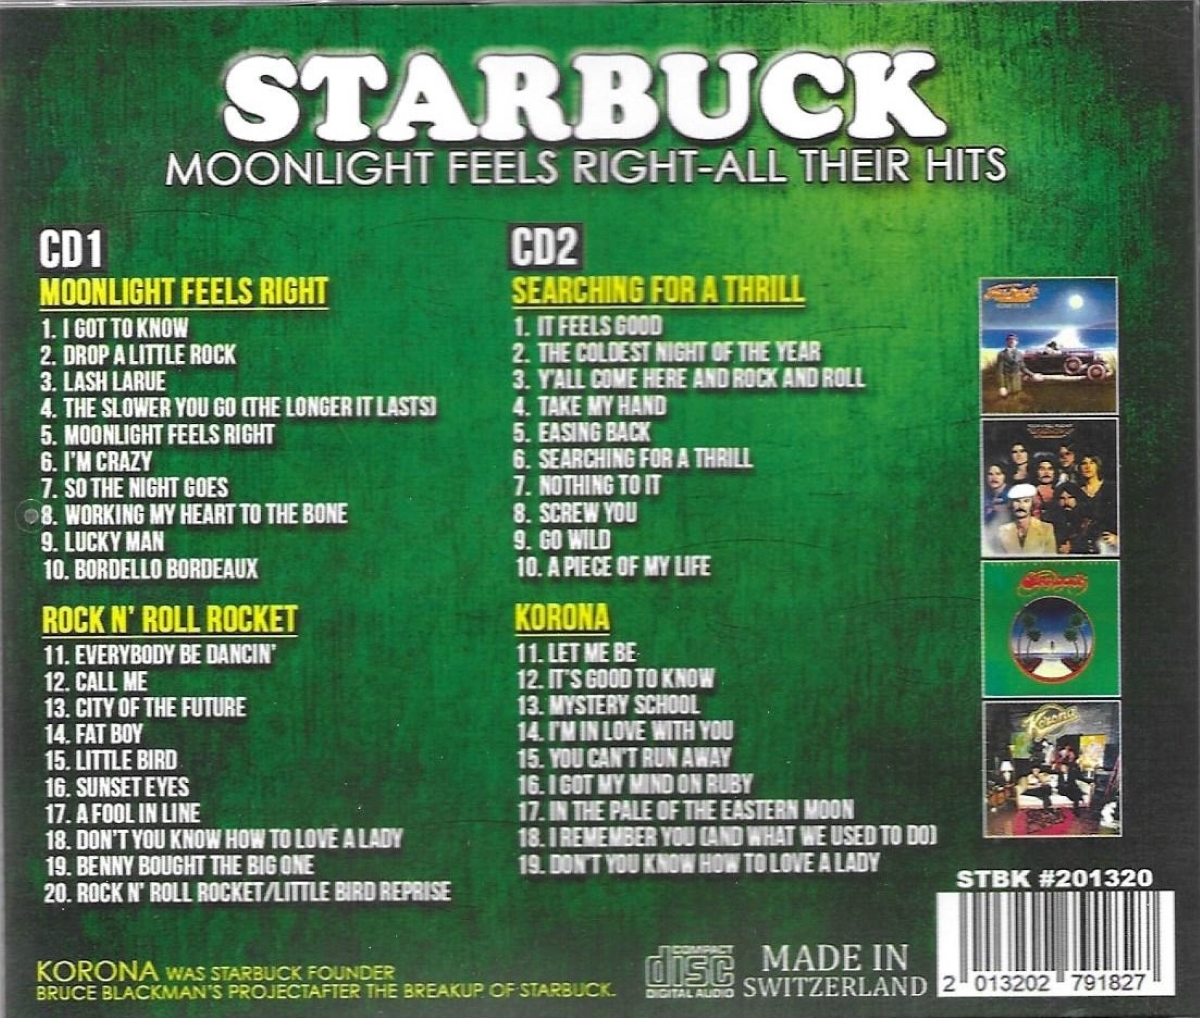 Moonlight Feels Right - All Their Hits-4 LPs on 2 CDs (2 CD)